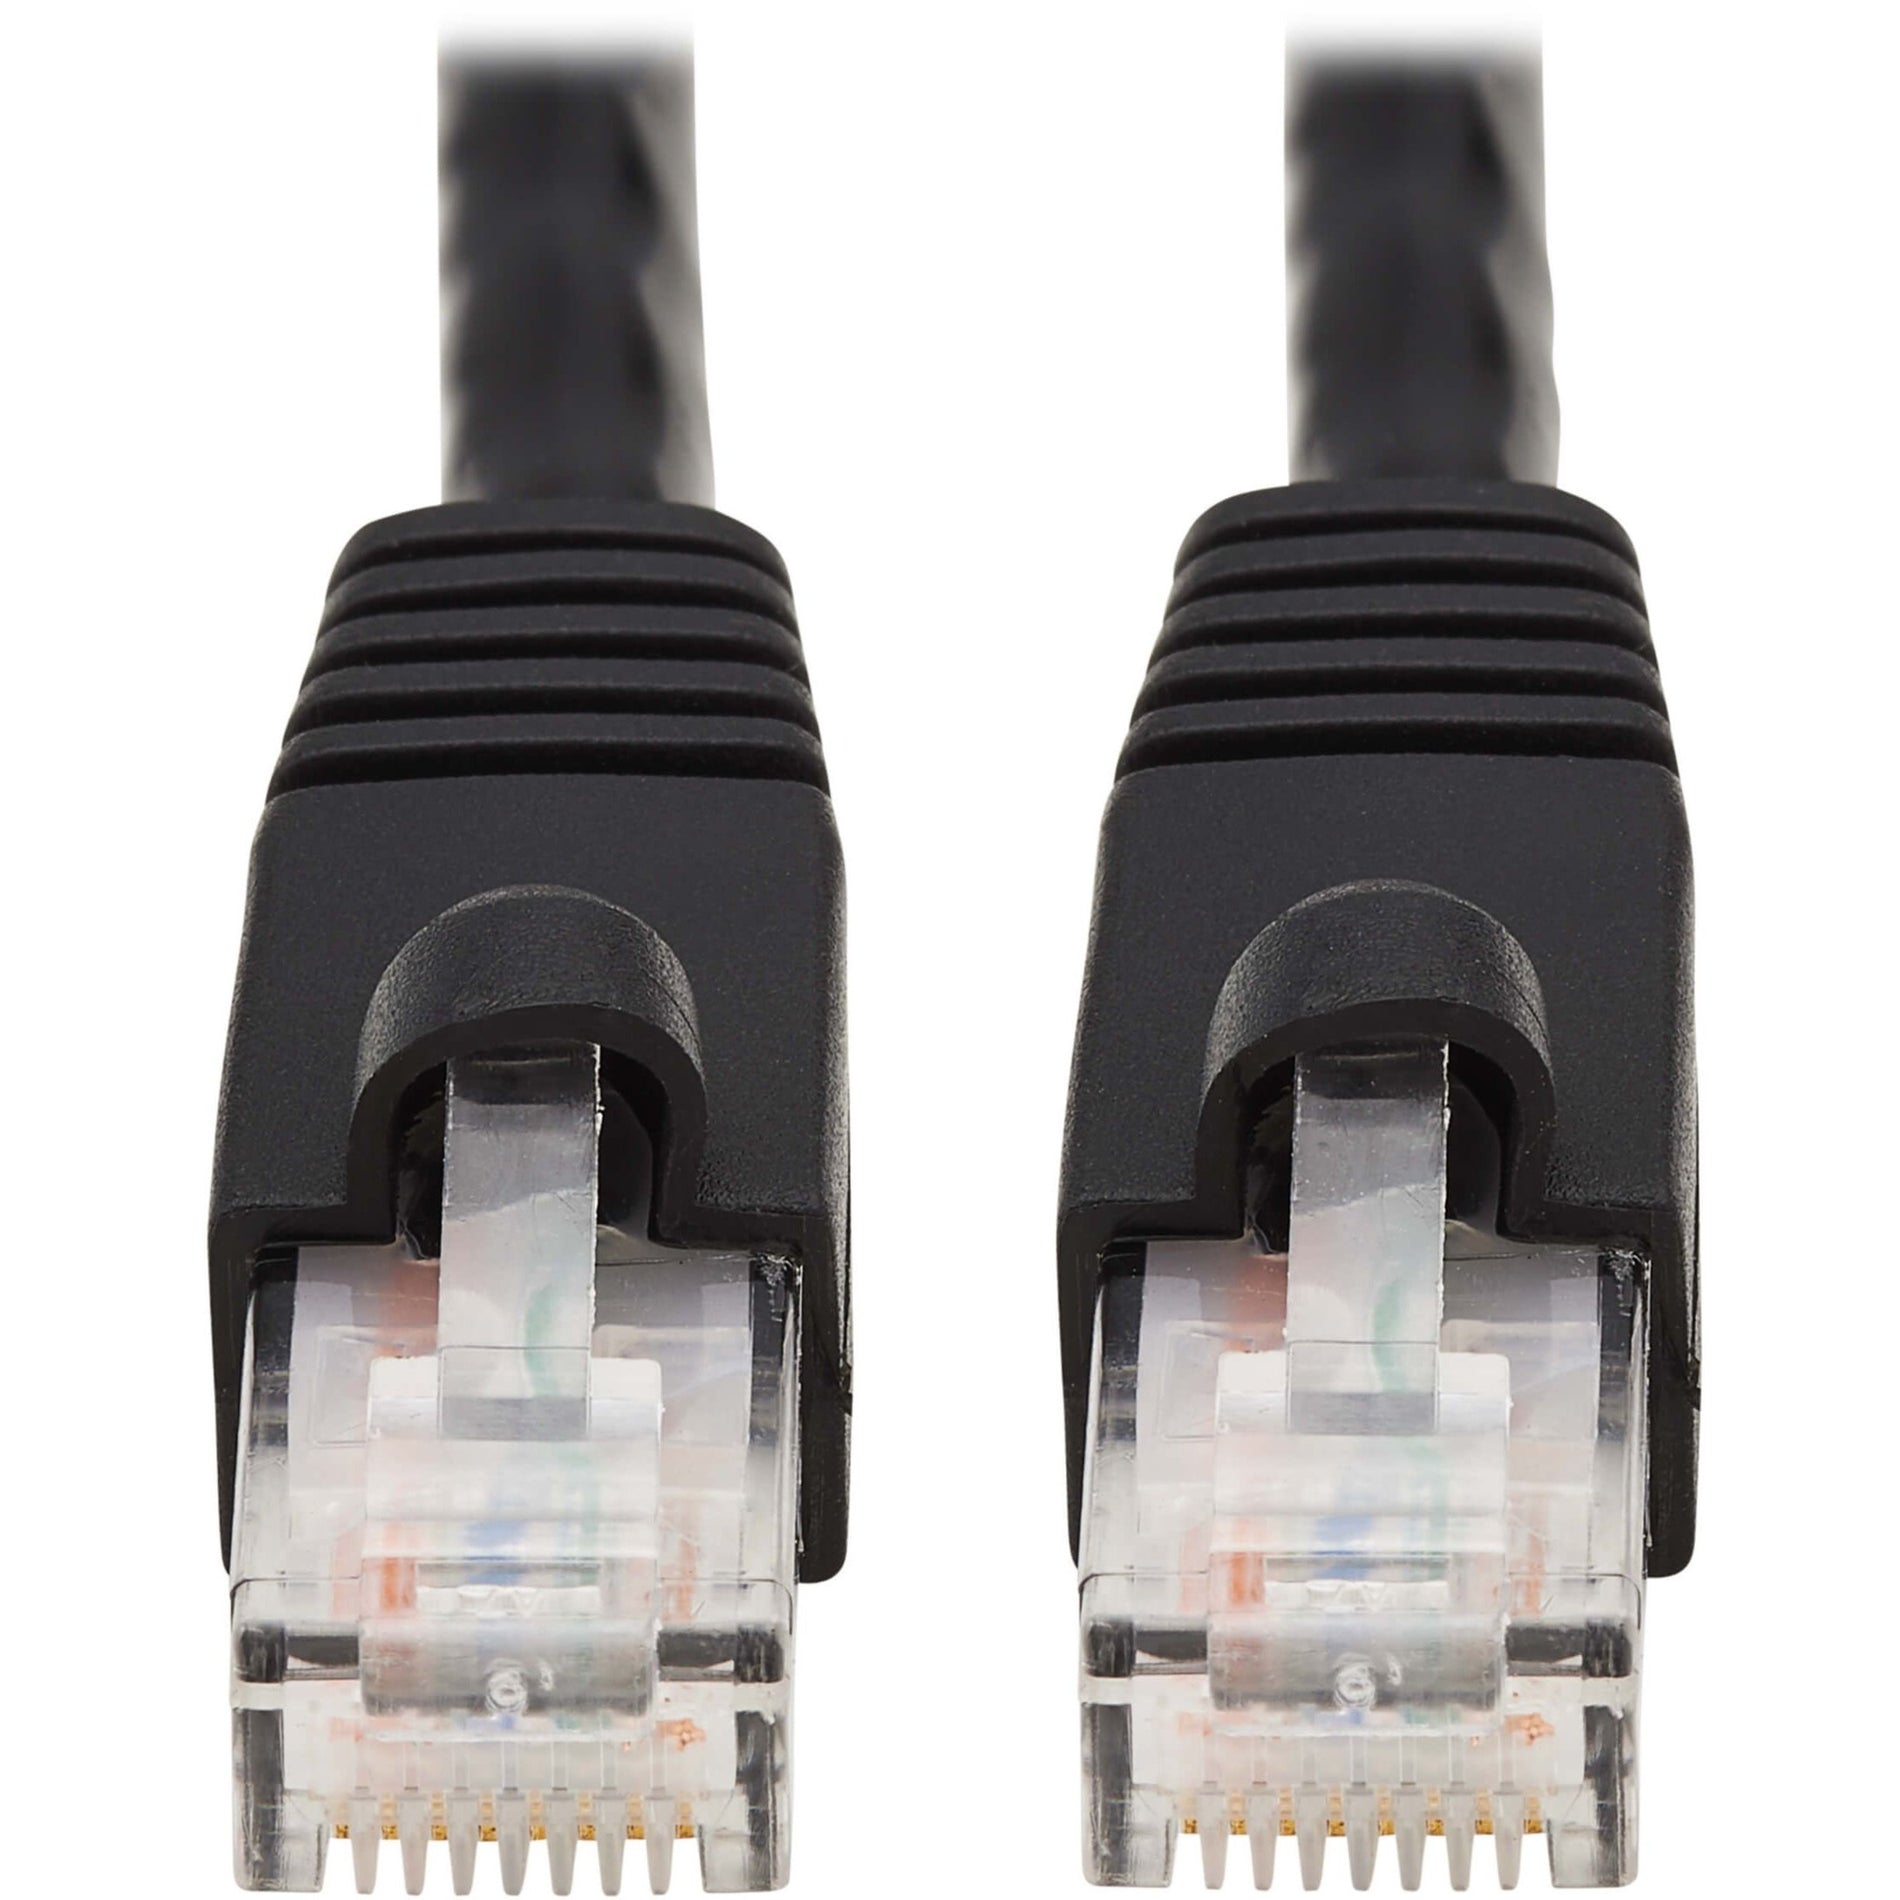 Tripp Lite N261-007-BK Cat.6a Network Cable, 7 ft, 10 Gbit/s Data Transfer Rate, Strain Relief, Snagless Boot